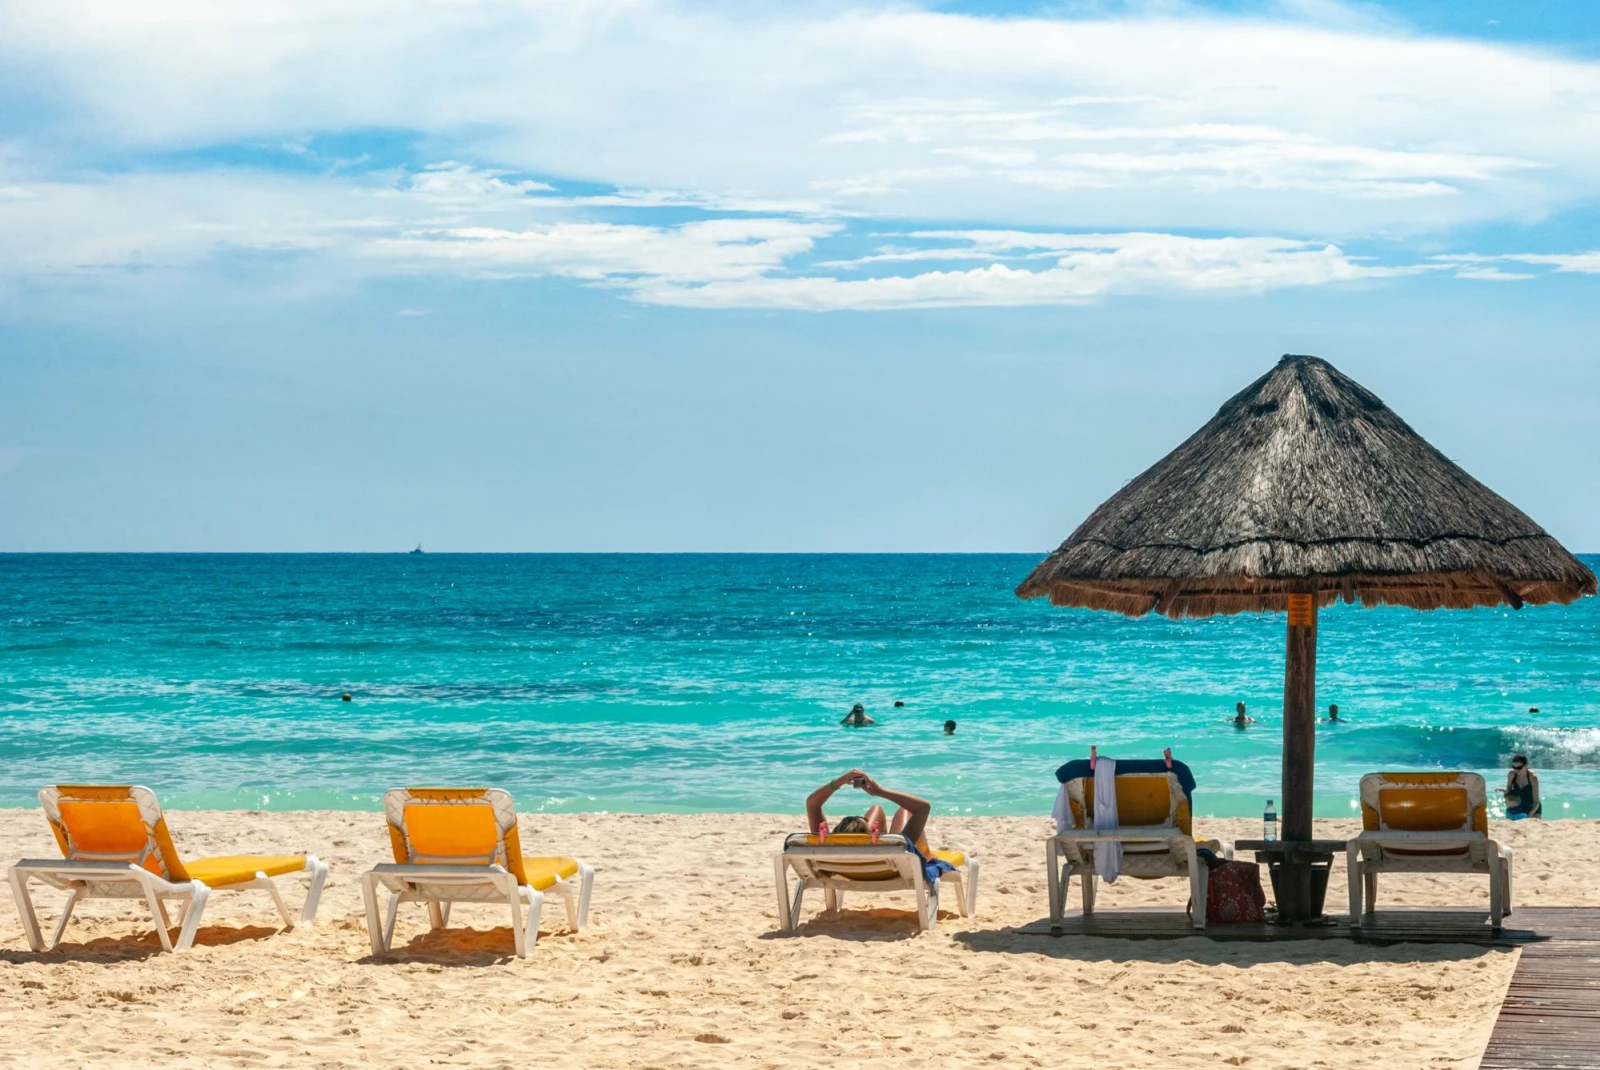 Yellow sunbeds on the shore with a view of turquoise waters in Cancun, Mexico.